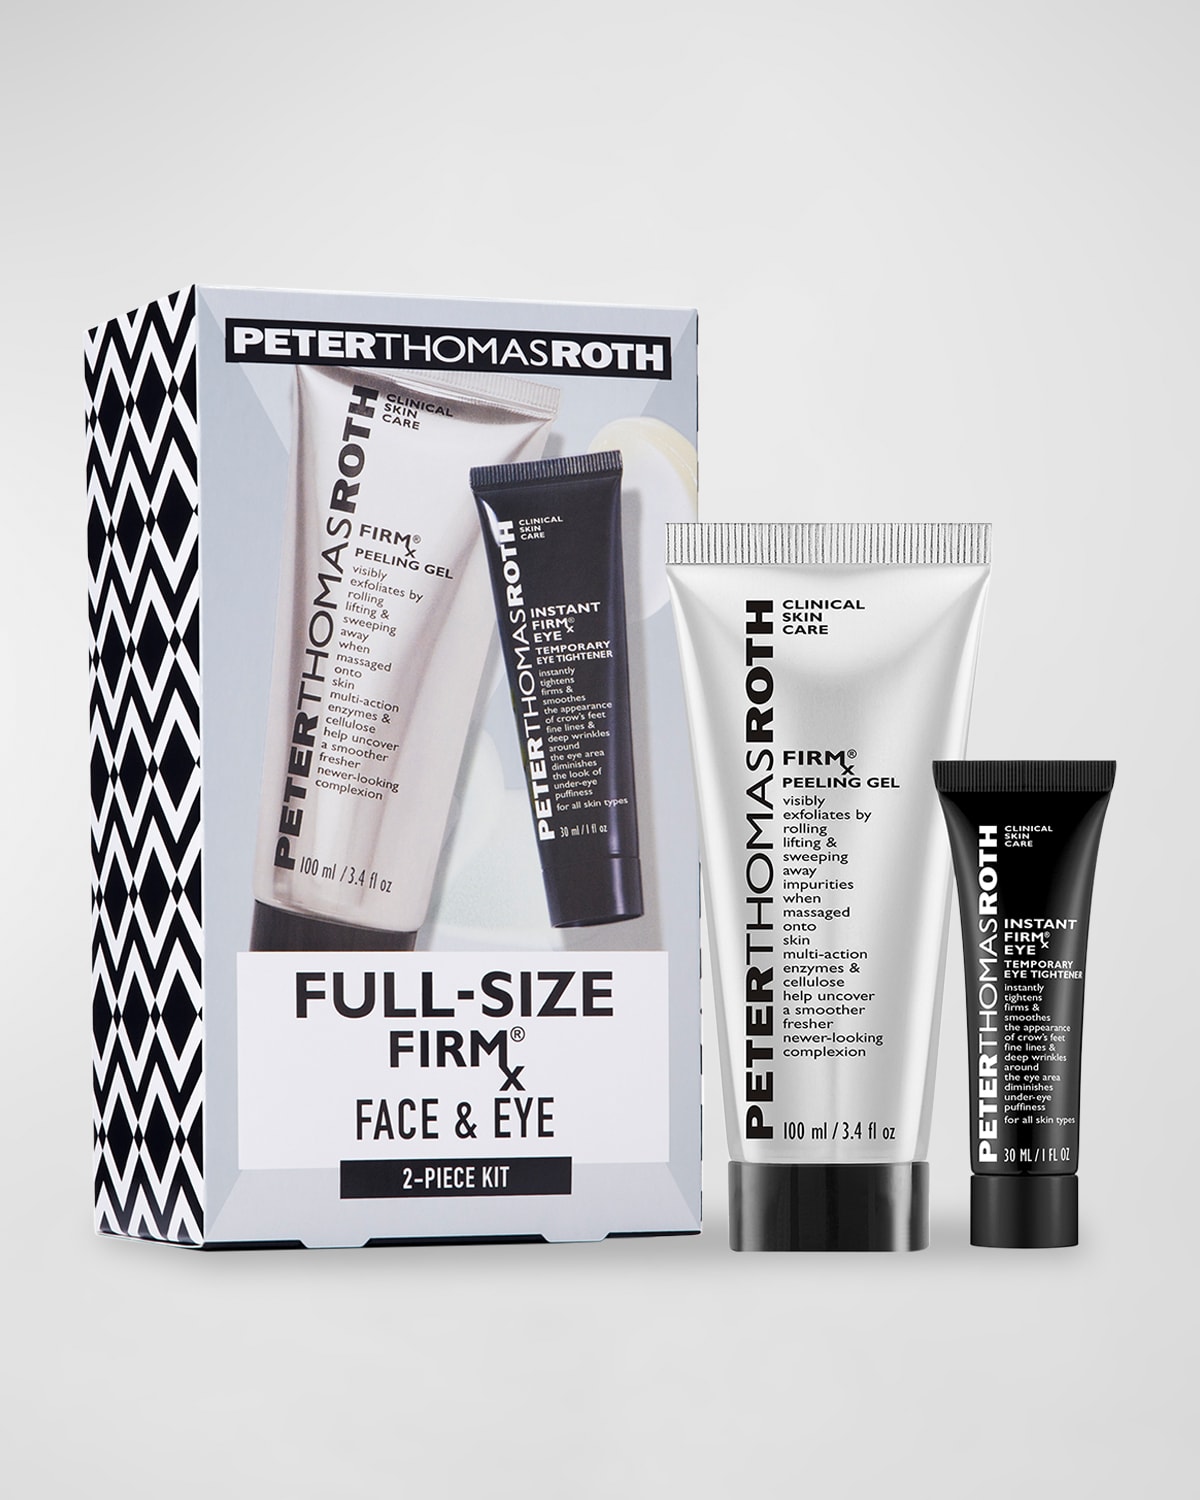 Limited Edition FIRMx Face & Eye 2-Piece Kit ($88 Value)